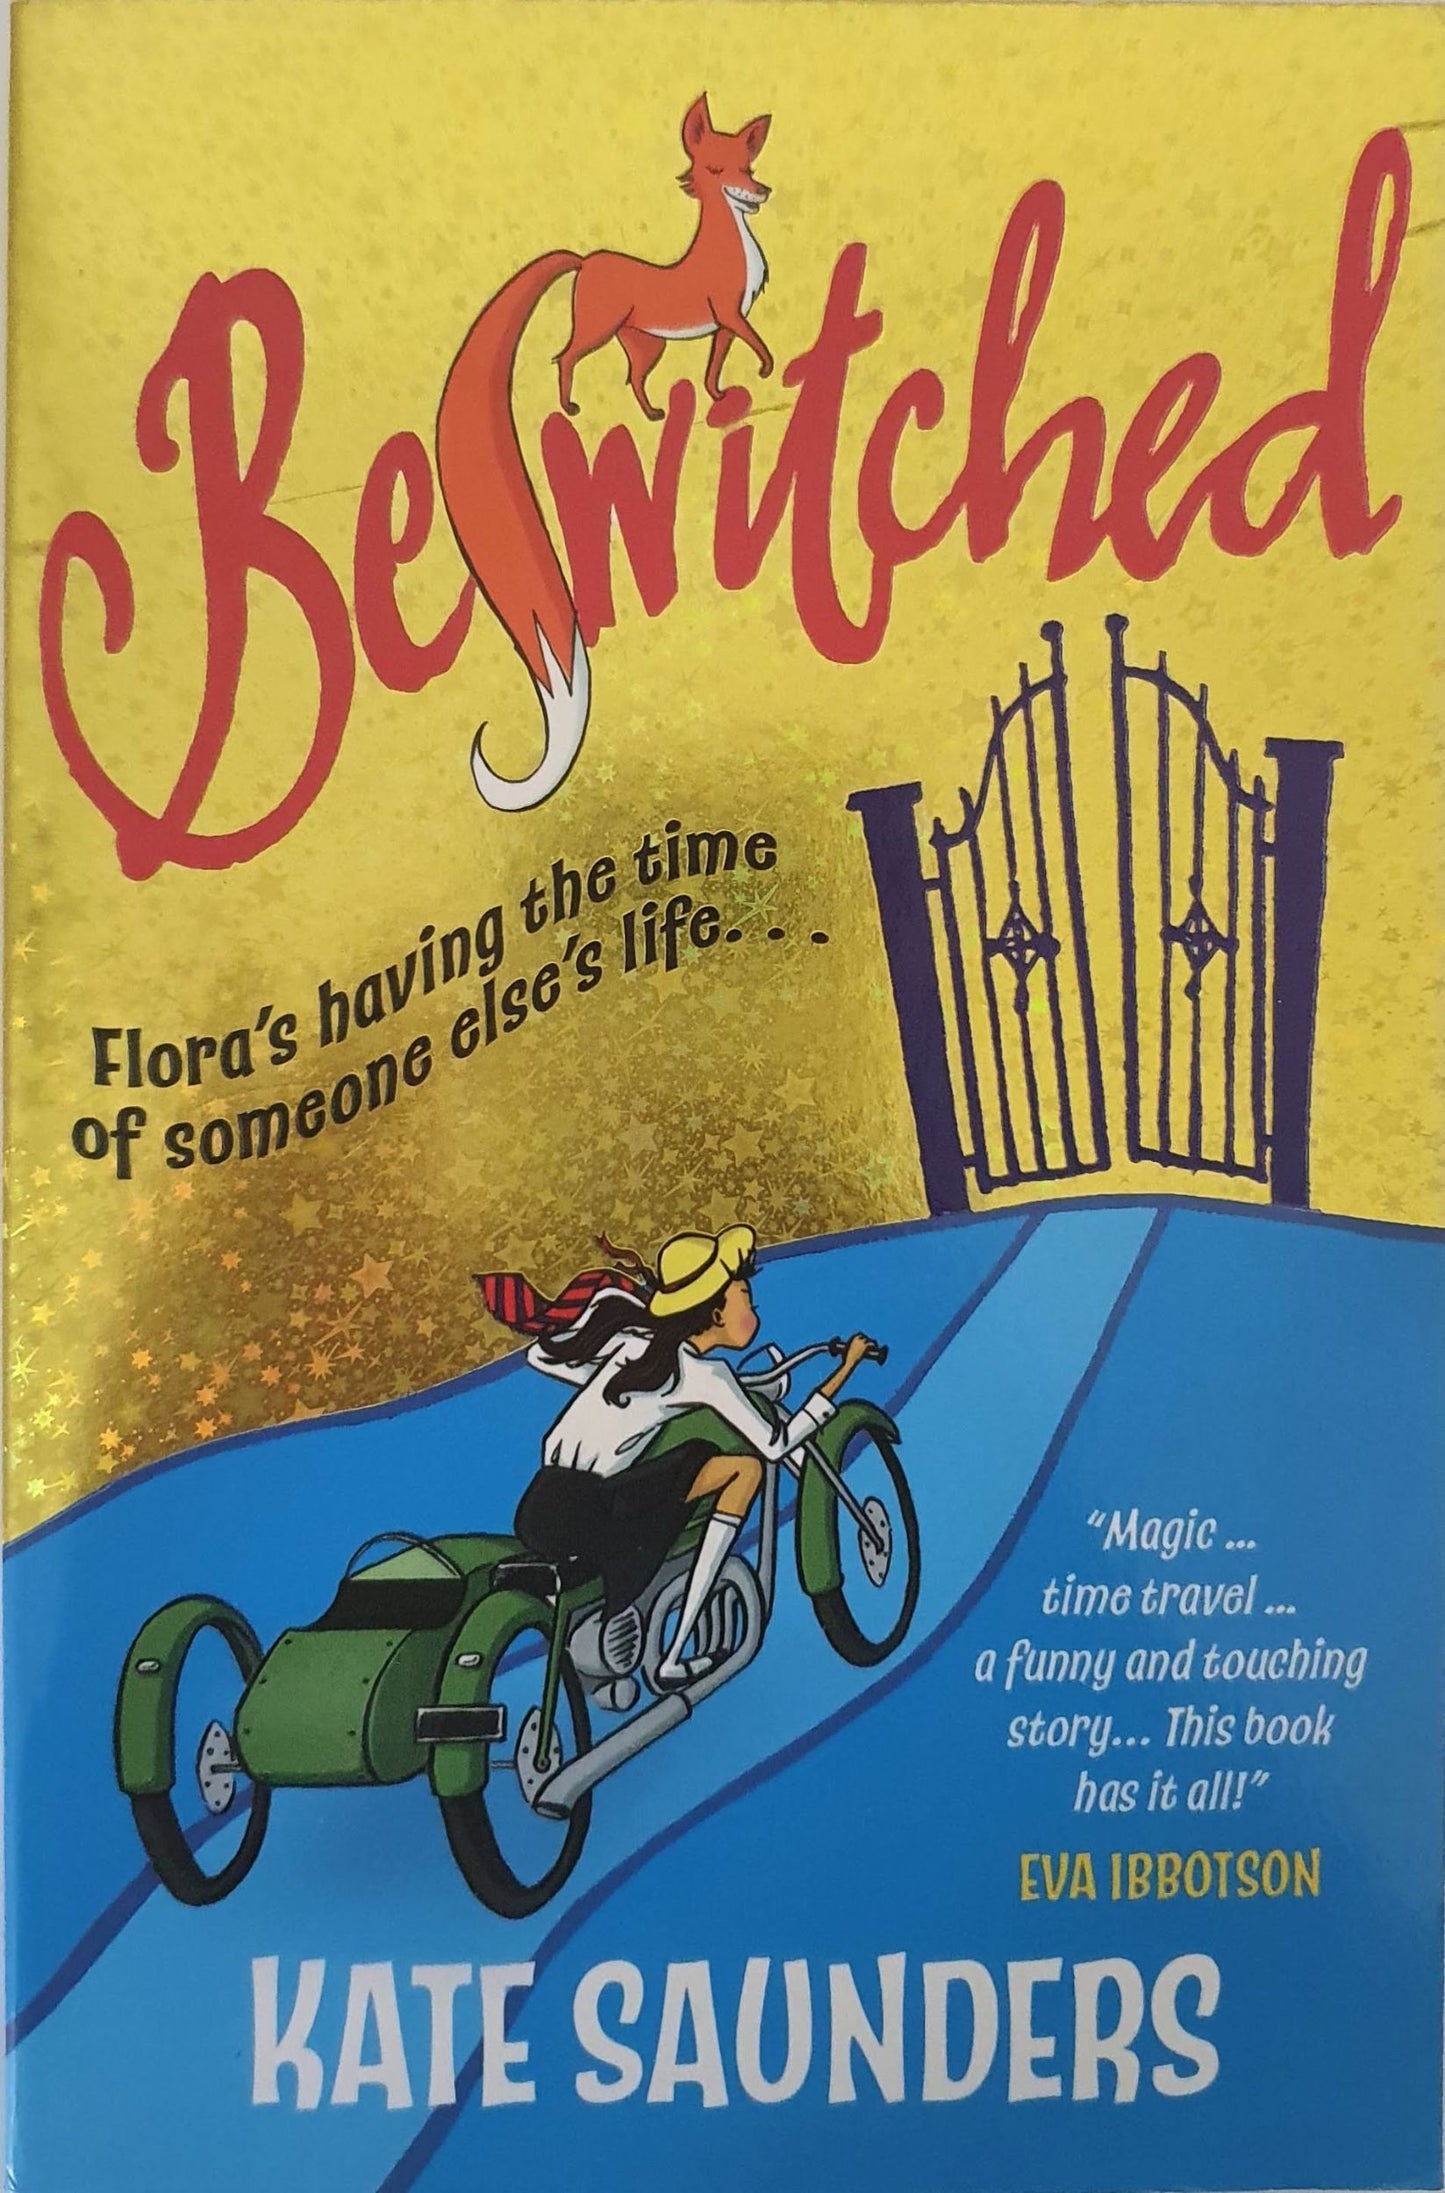 Bewitched - Flora's having the time of someone else's life Like New Not Applicable  (4602616152119)